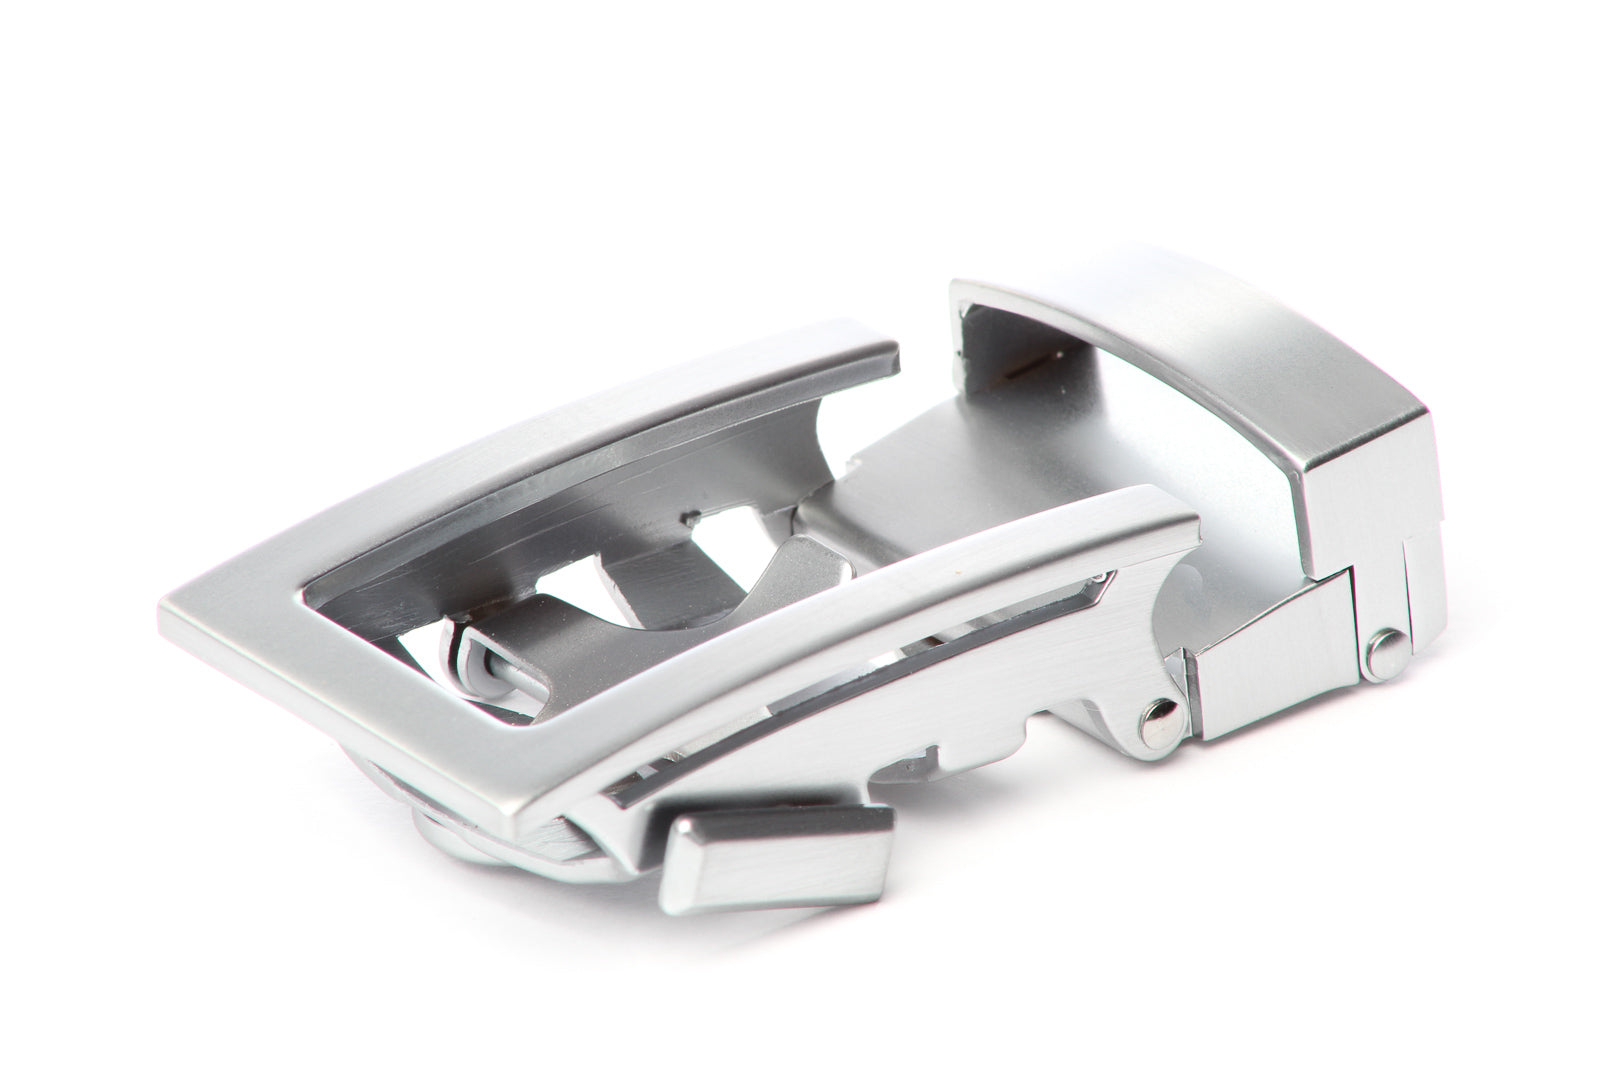 Men's traditional ratchet belt buckle in silver with a 1.25-inch width.